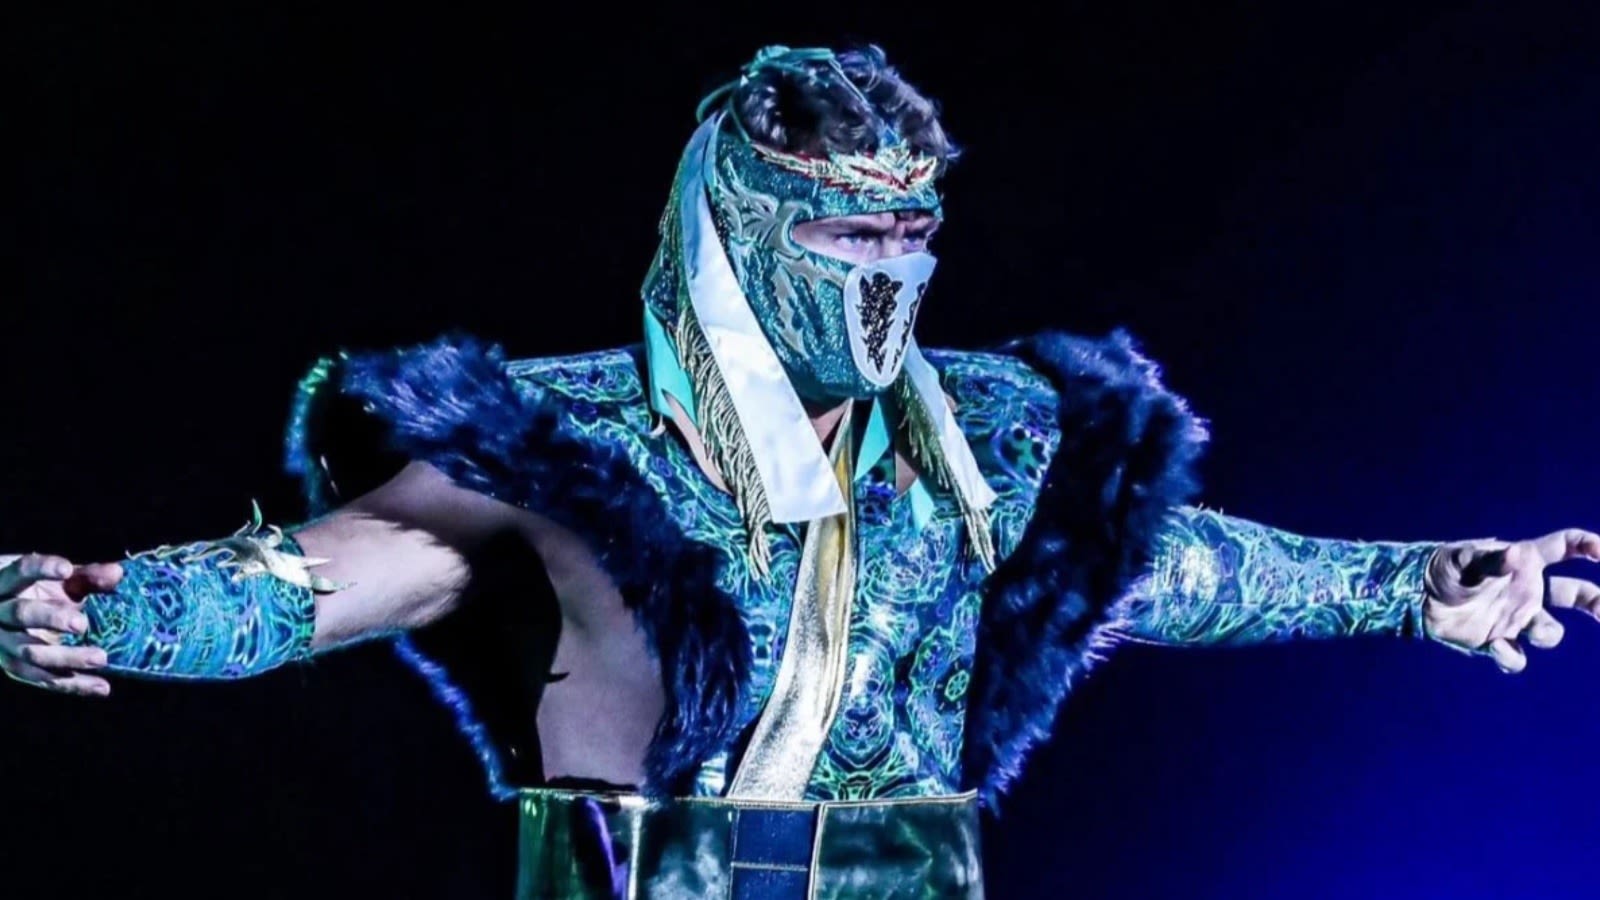 Video: AEW's Will Ospreay Discusses Hayabusa-Inspired Ring Gear For Forbidden Door - Wrestling Inc.